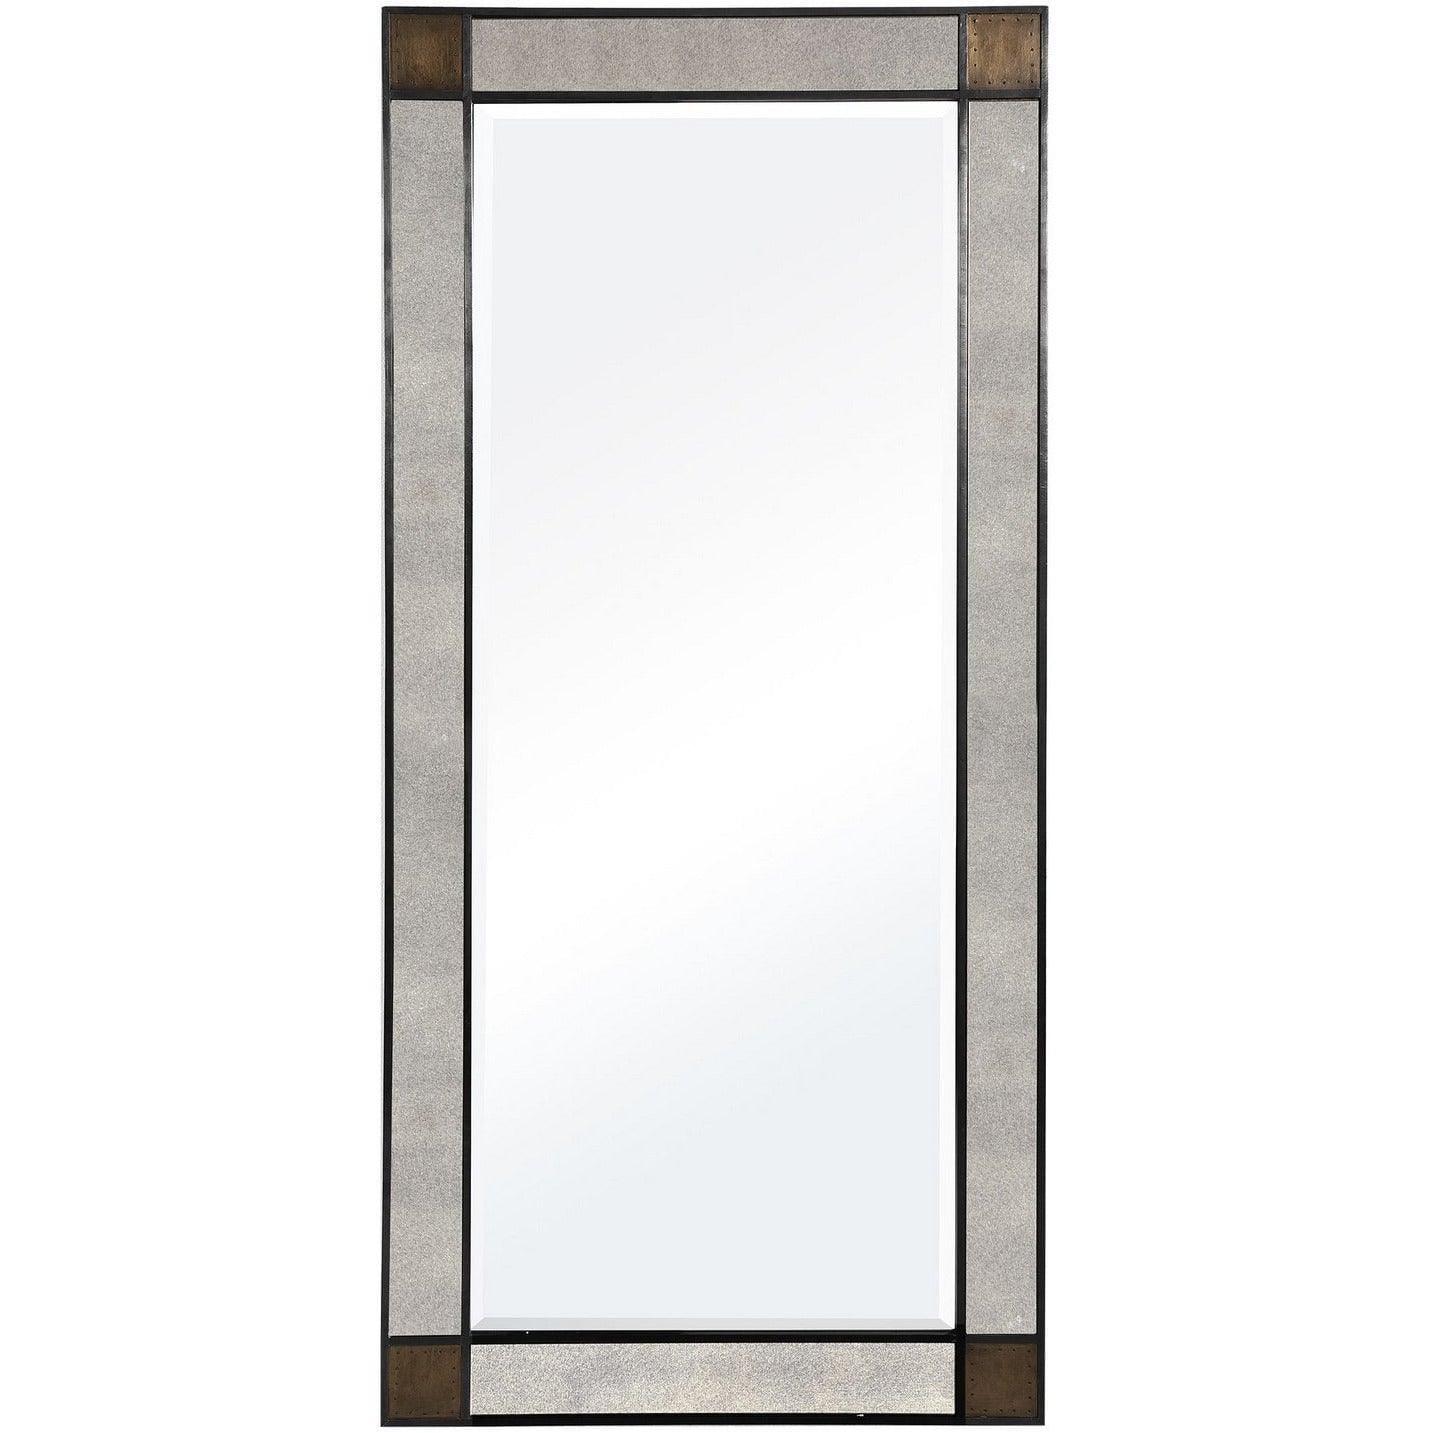 The Uttermost - Newcomb Mirror - 09676 | Montreal Lighting & Hardware